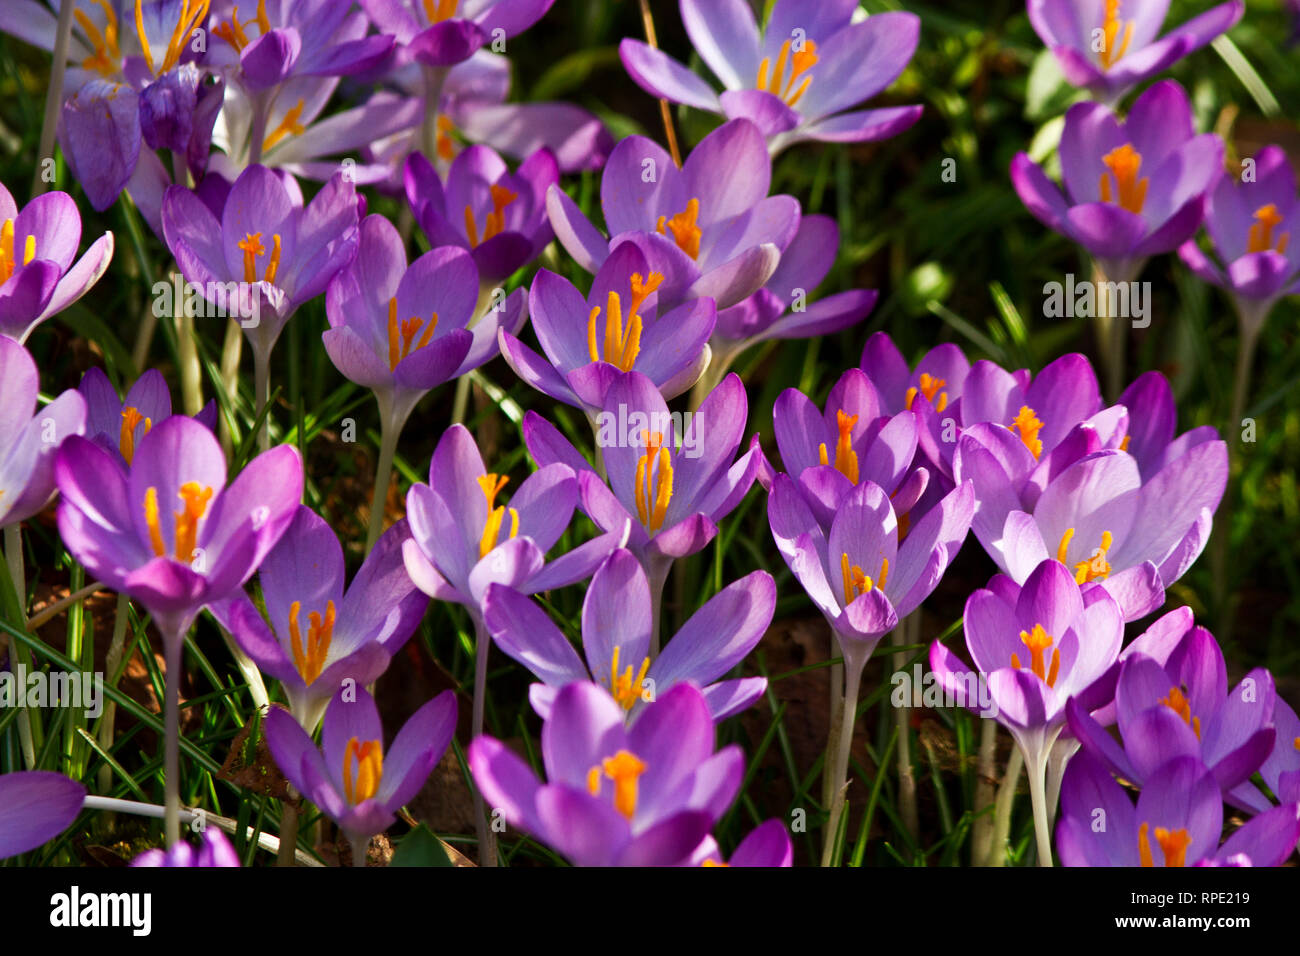 One of the first flowers to burst forth at the end of winter the Crocus brightens up the garden and spirits as a sign that spring is on the way Stock Photo